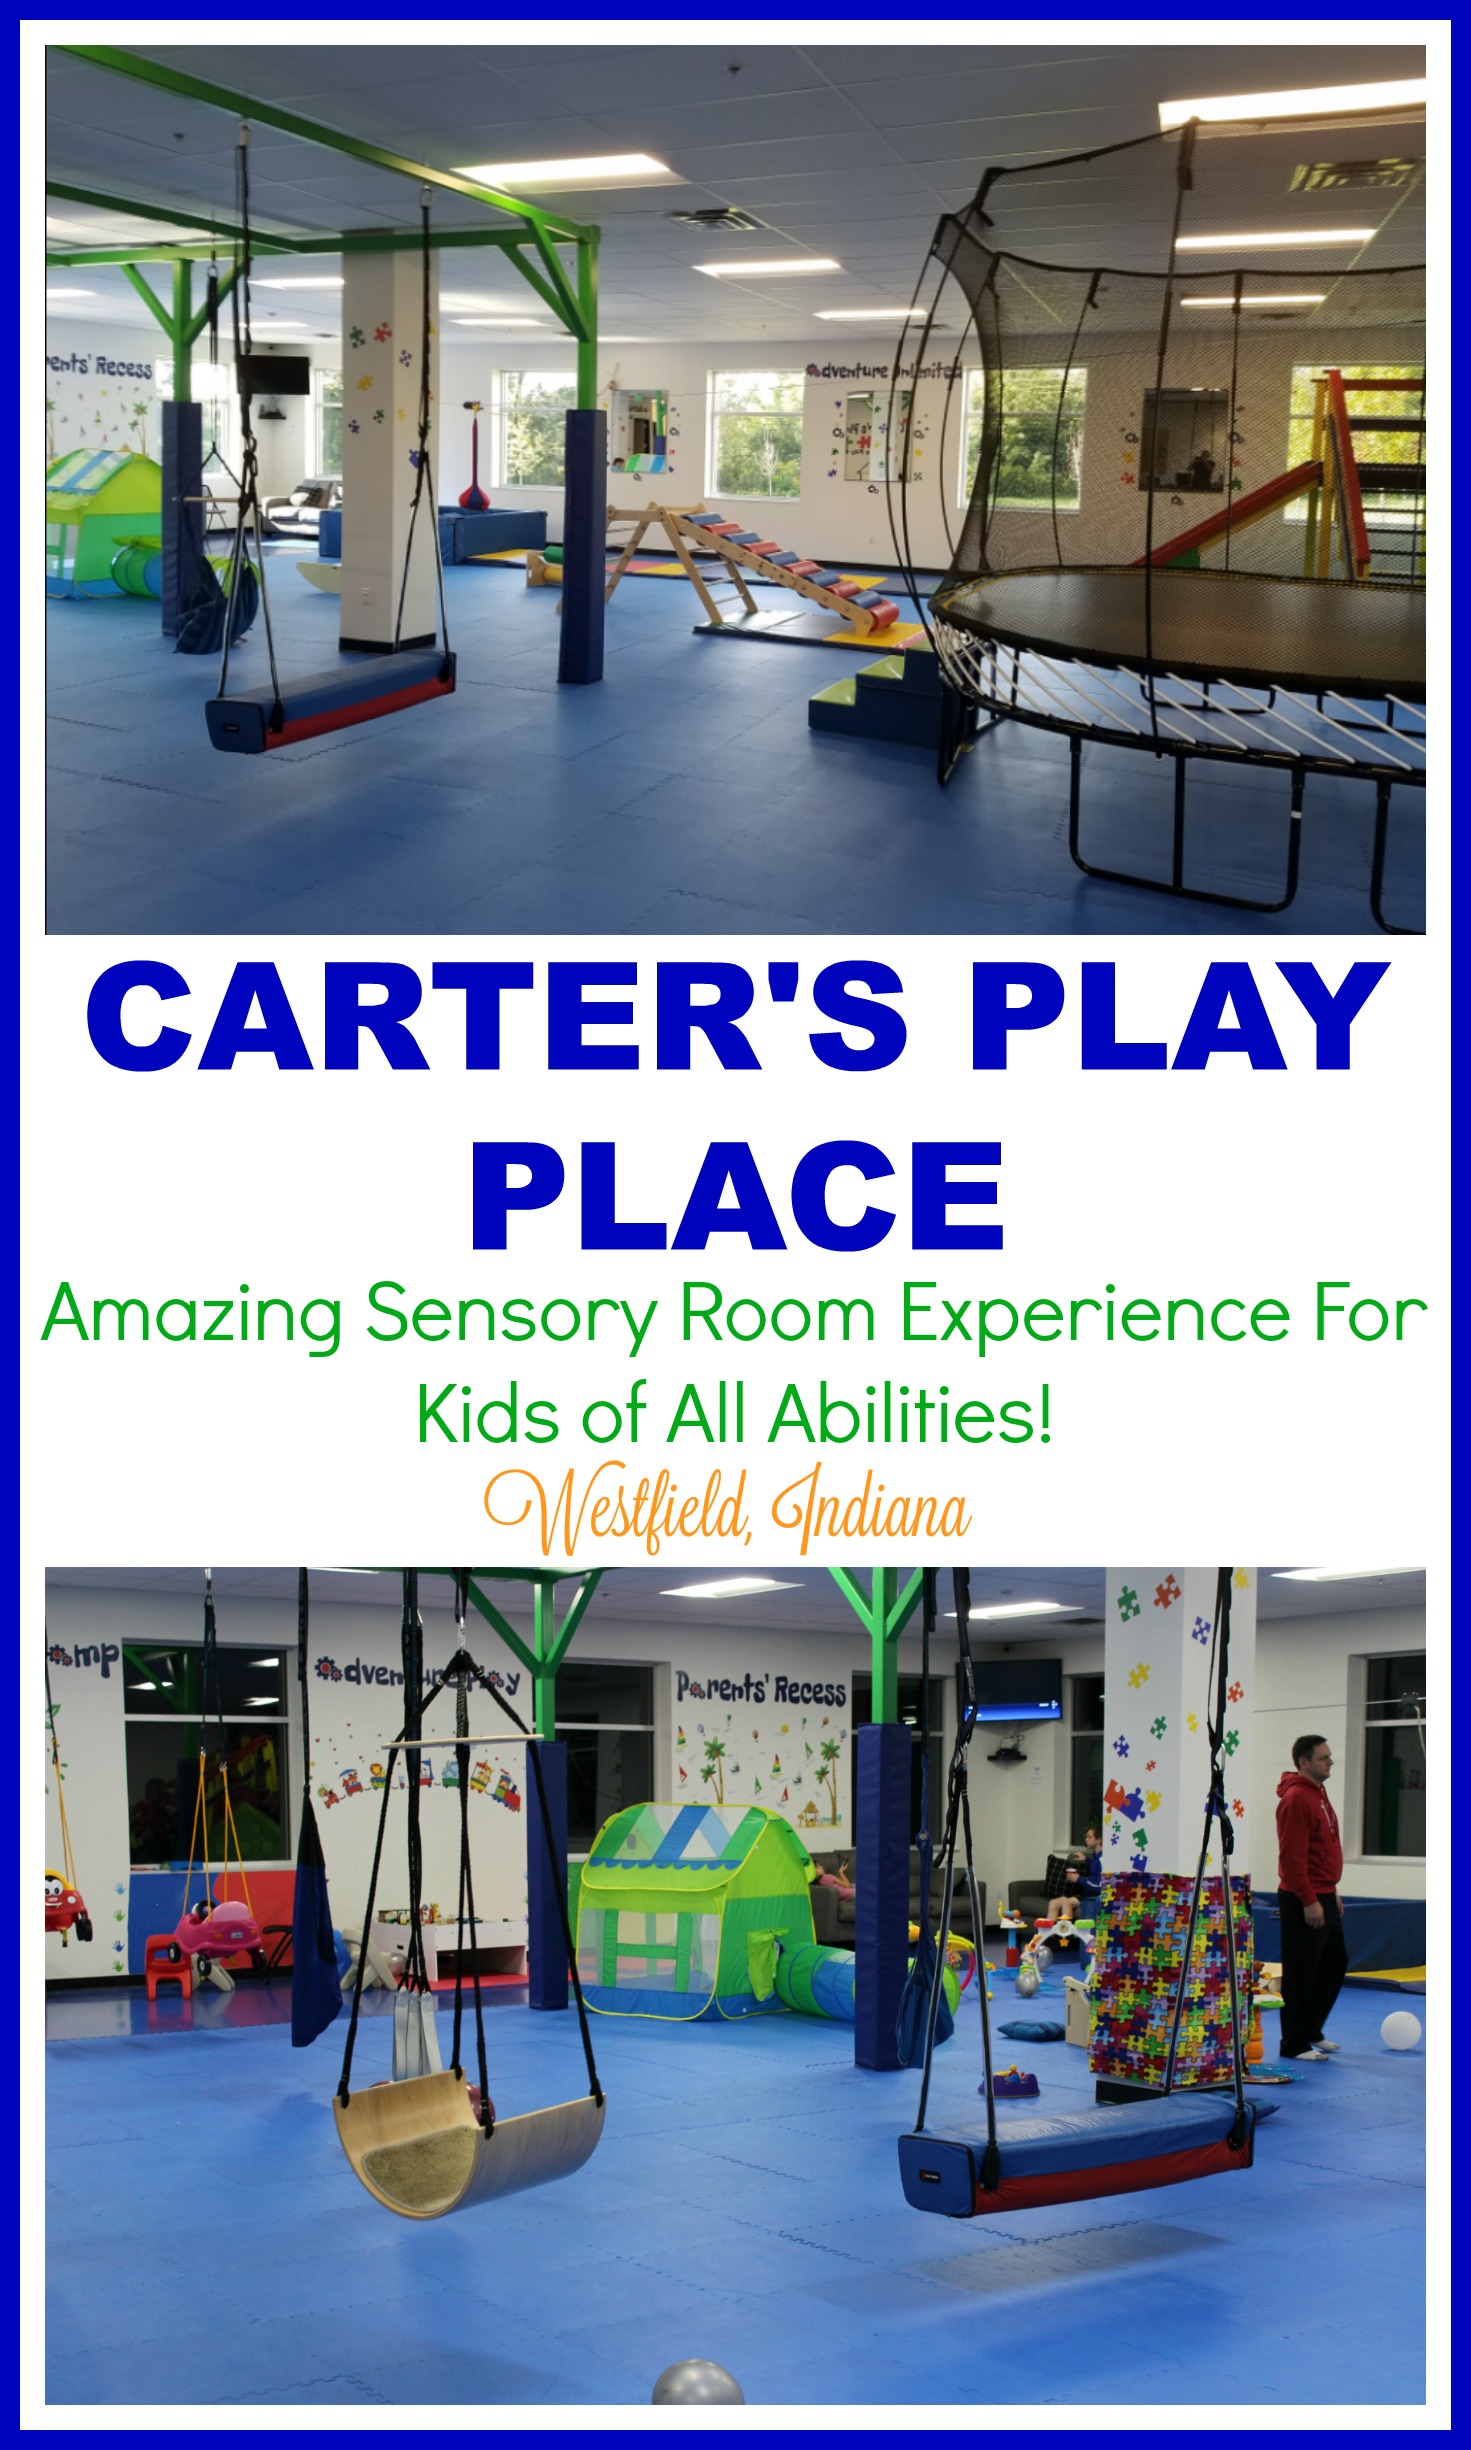 Carter's Play Place